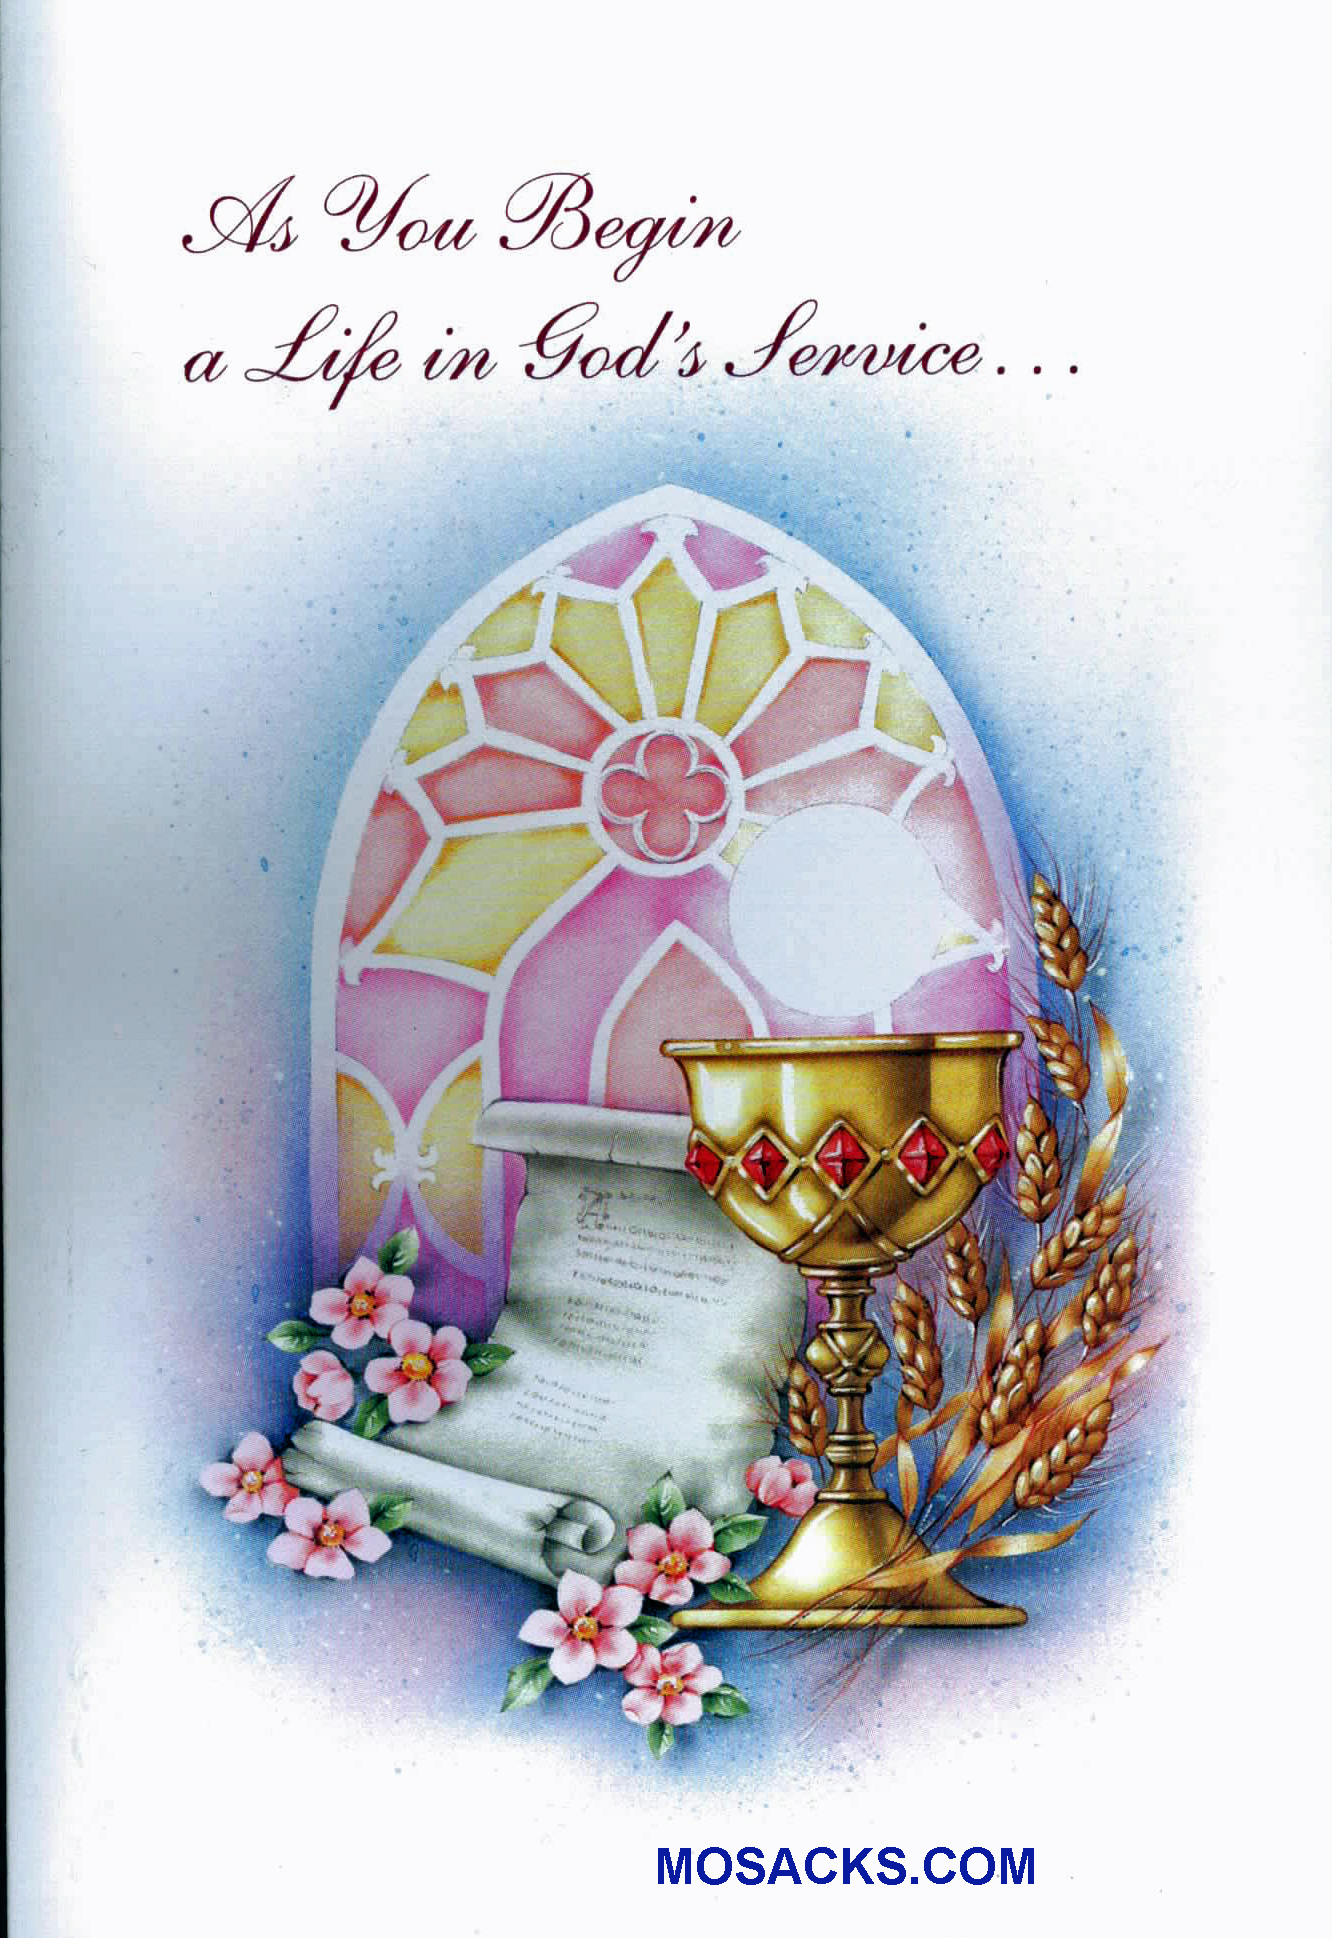 Lord's Service Greeting Cards